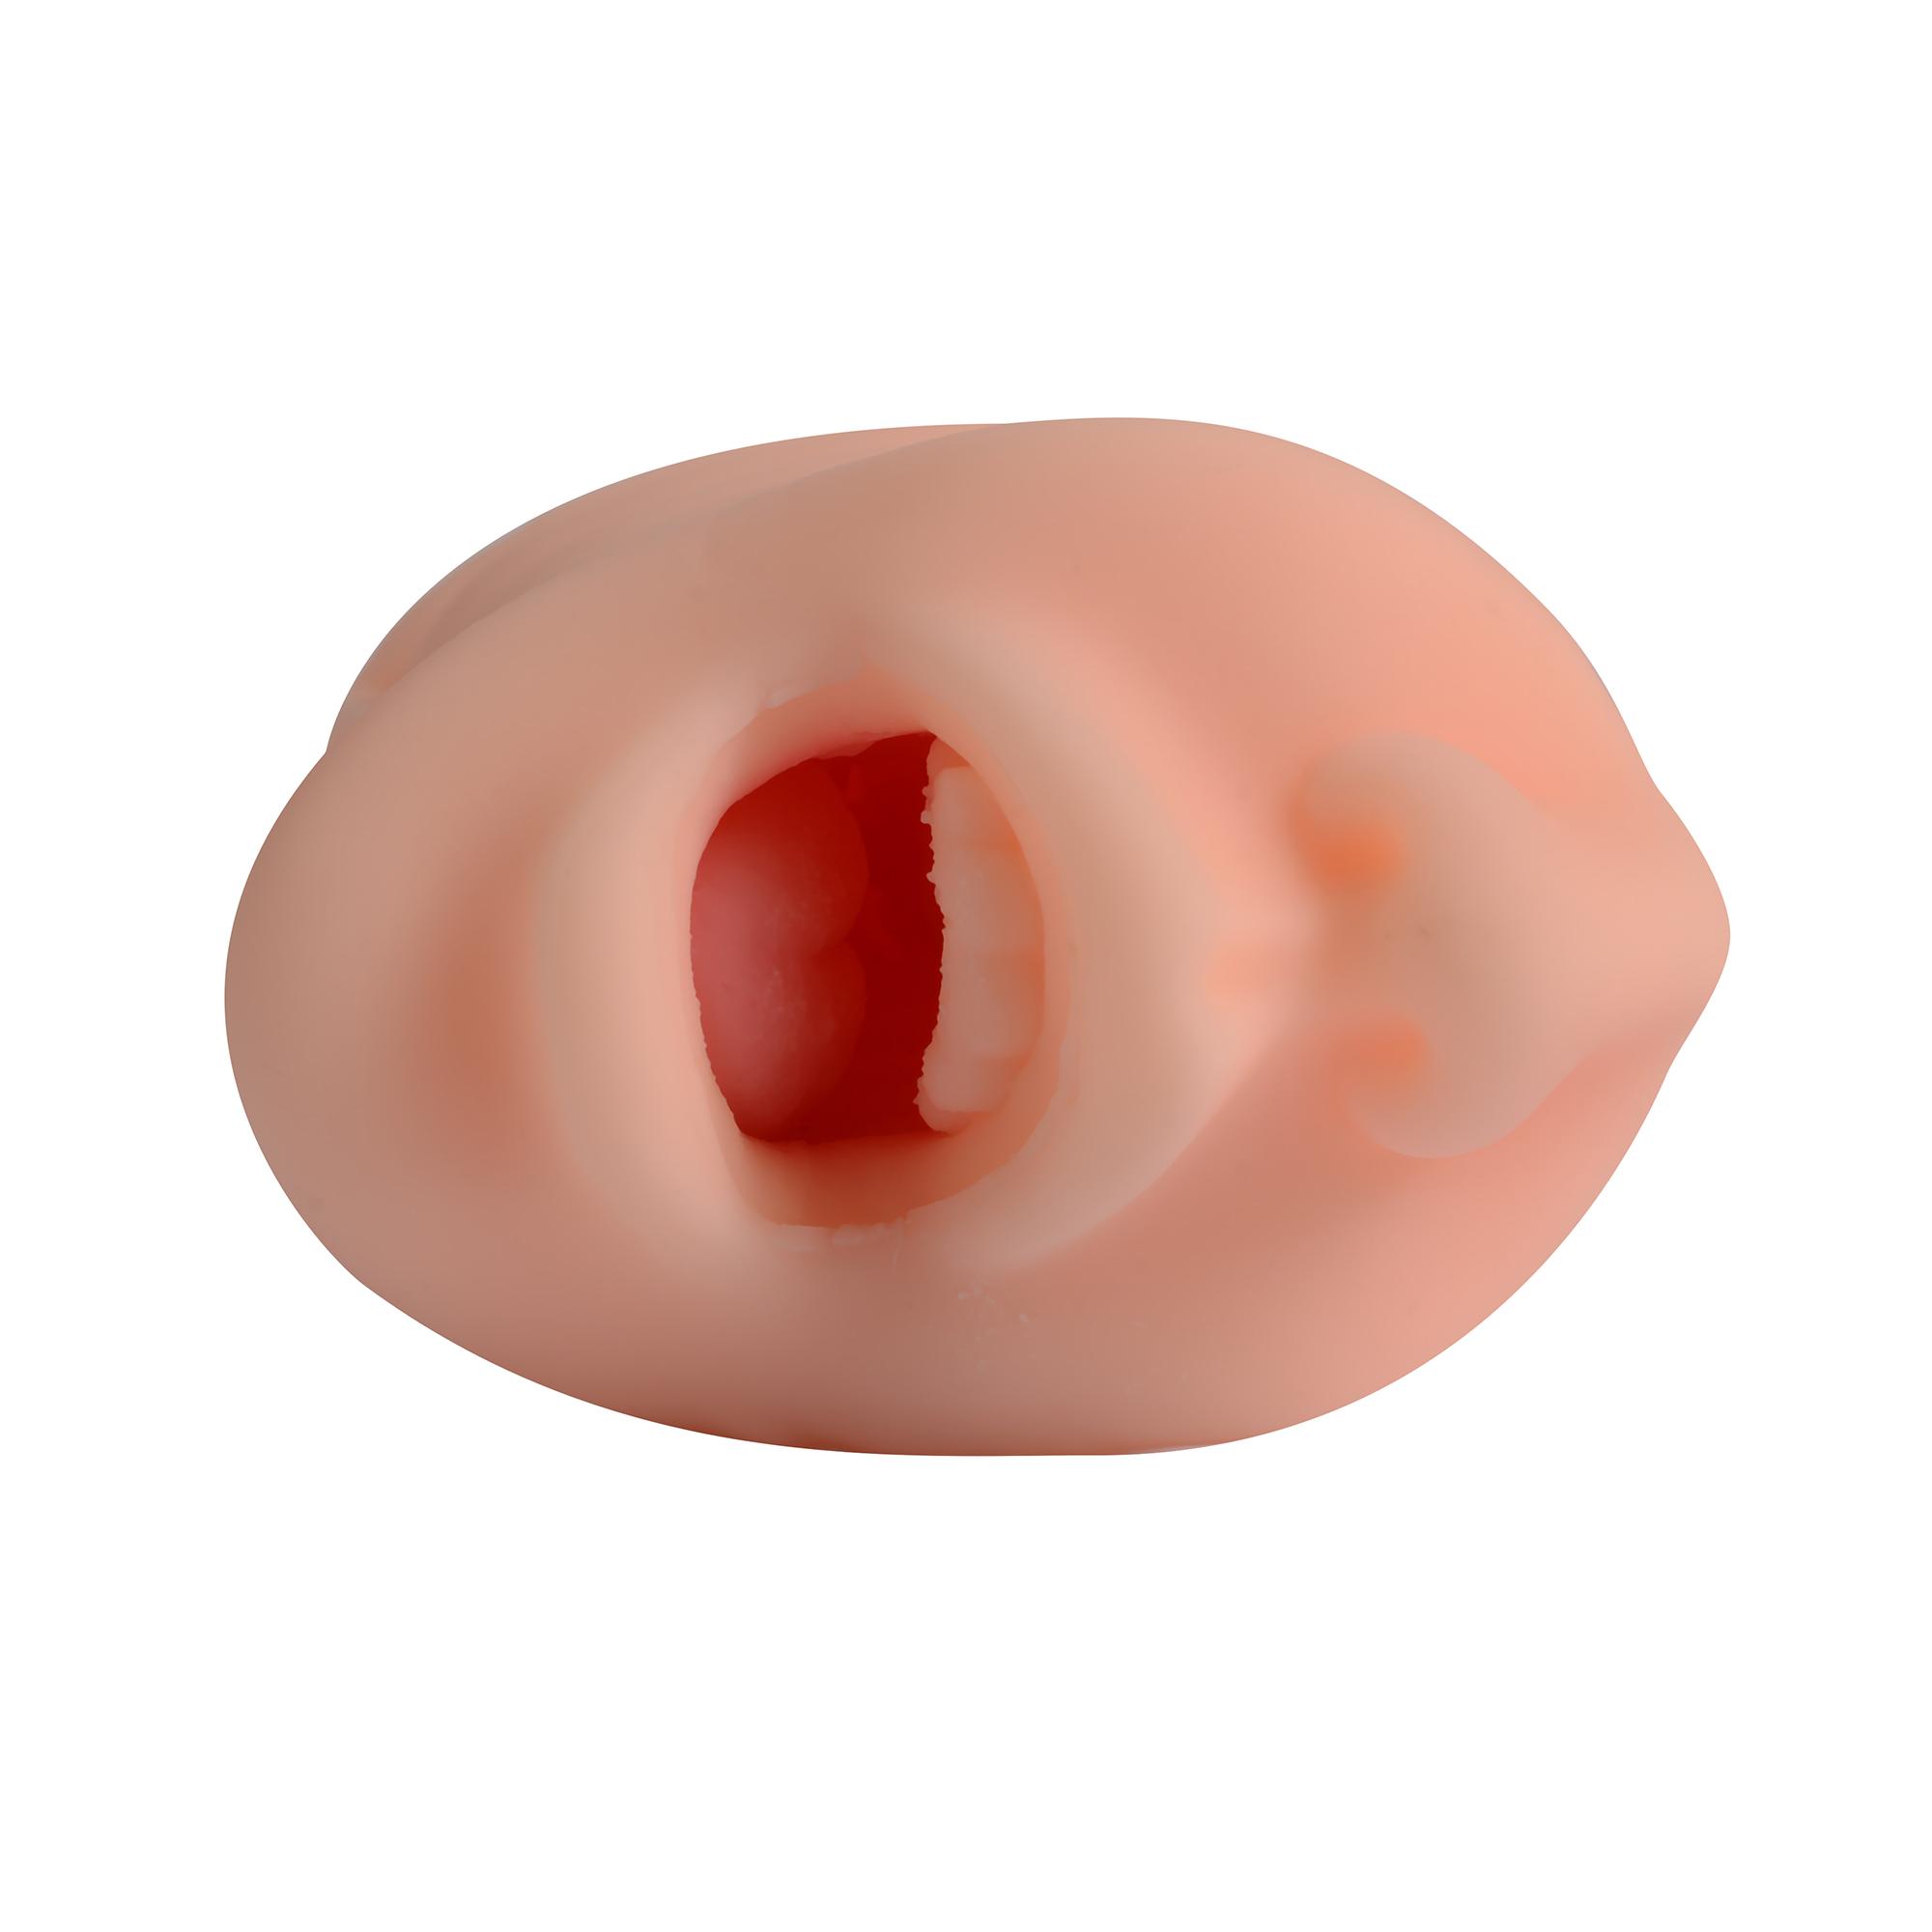  Realistic Sex Doll Masturbator With Textured Tight Anus And Mouth Vagina Deep Throat Soft Mini Real Adult Sex Toys For Men